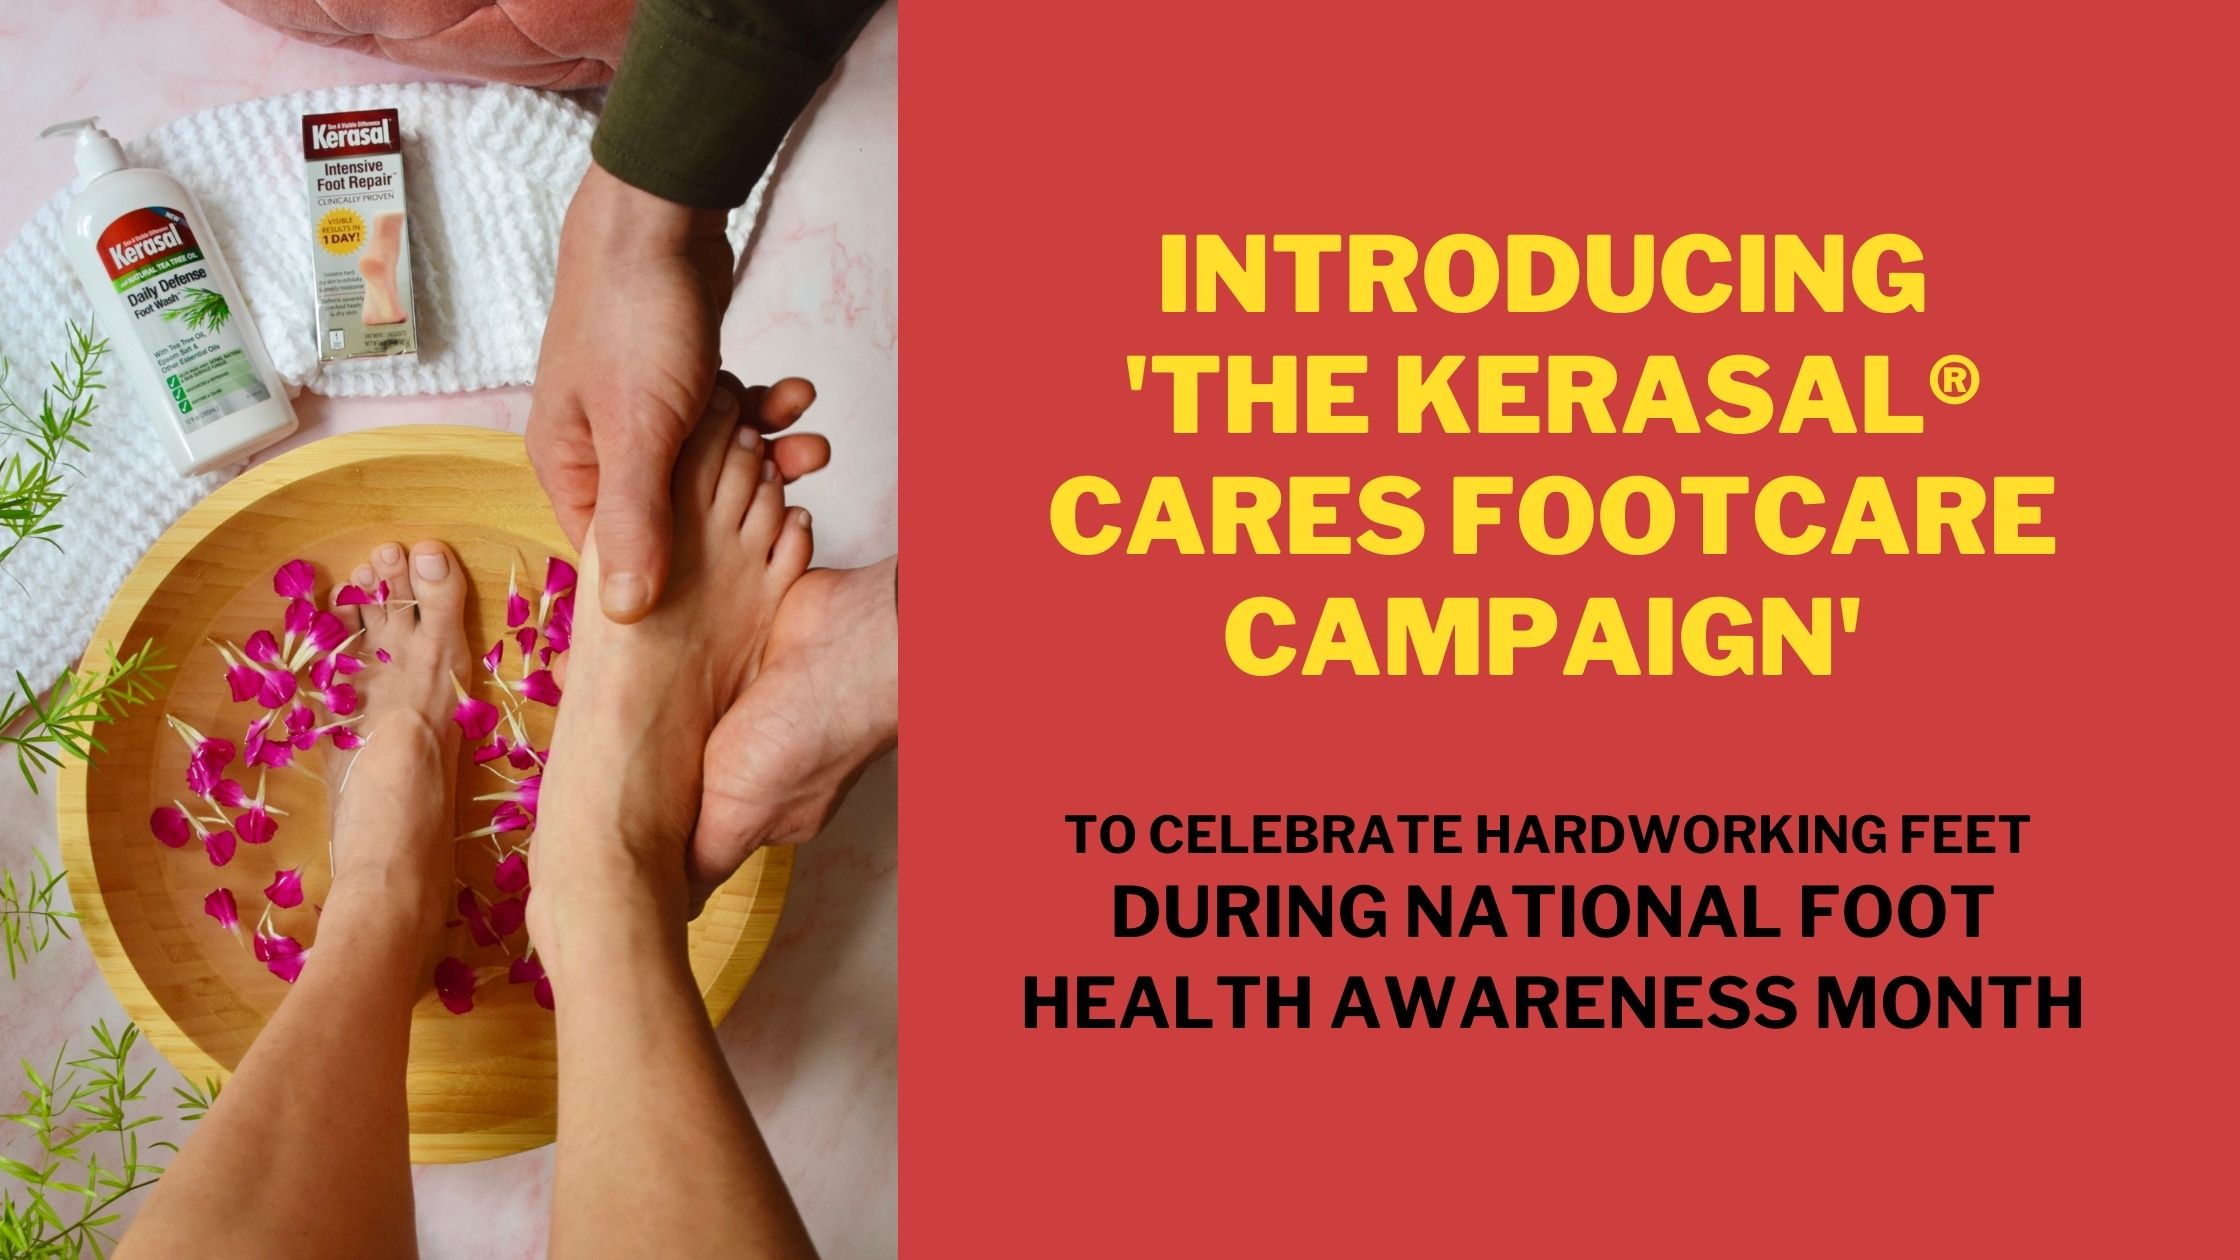 Introducing 'The Kerasal® Cares FootCare Campaign' to Celebrate Hardworking Feet During National Foot Health Awareness Month